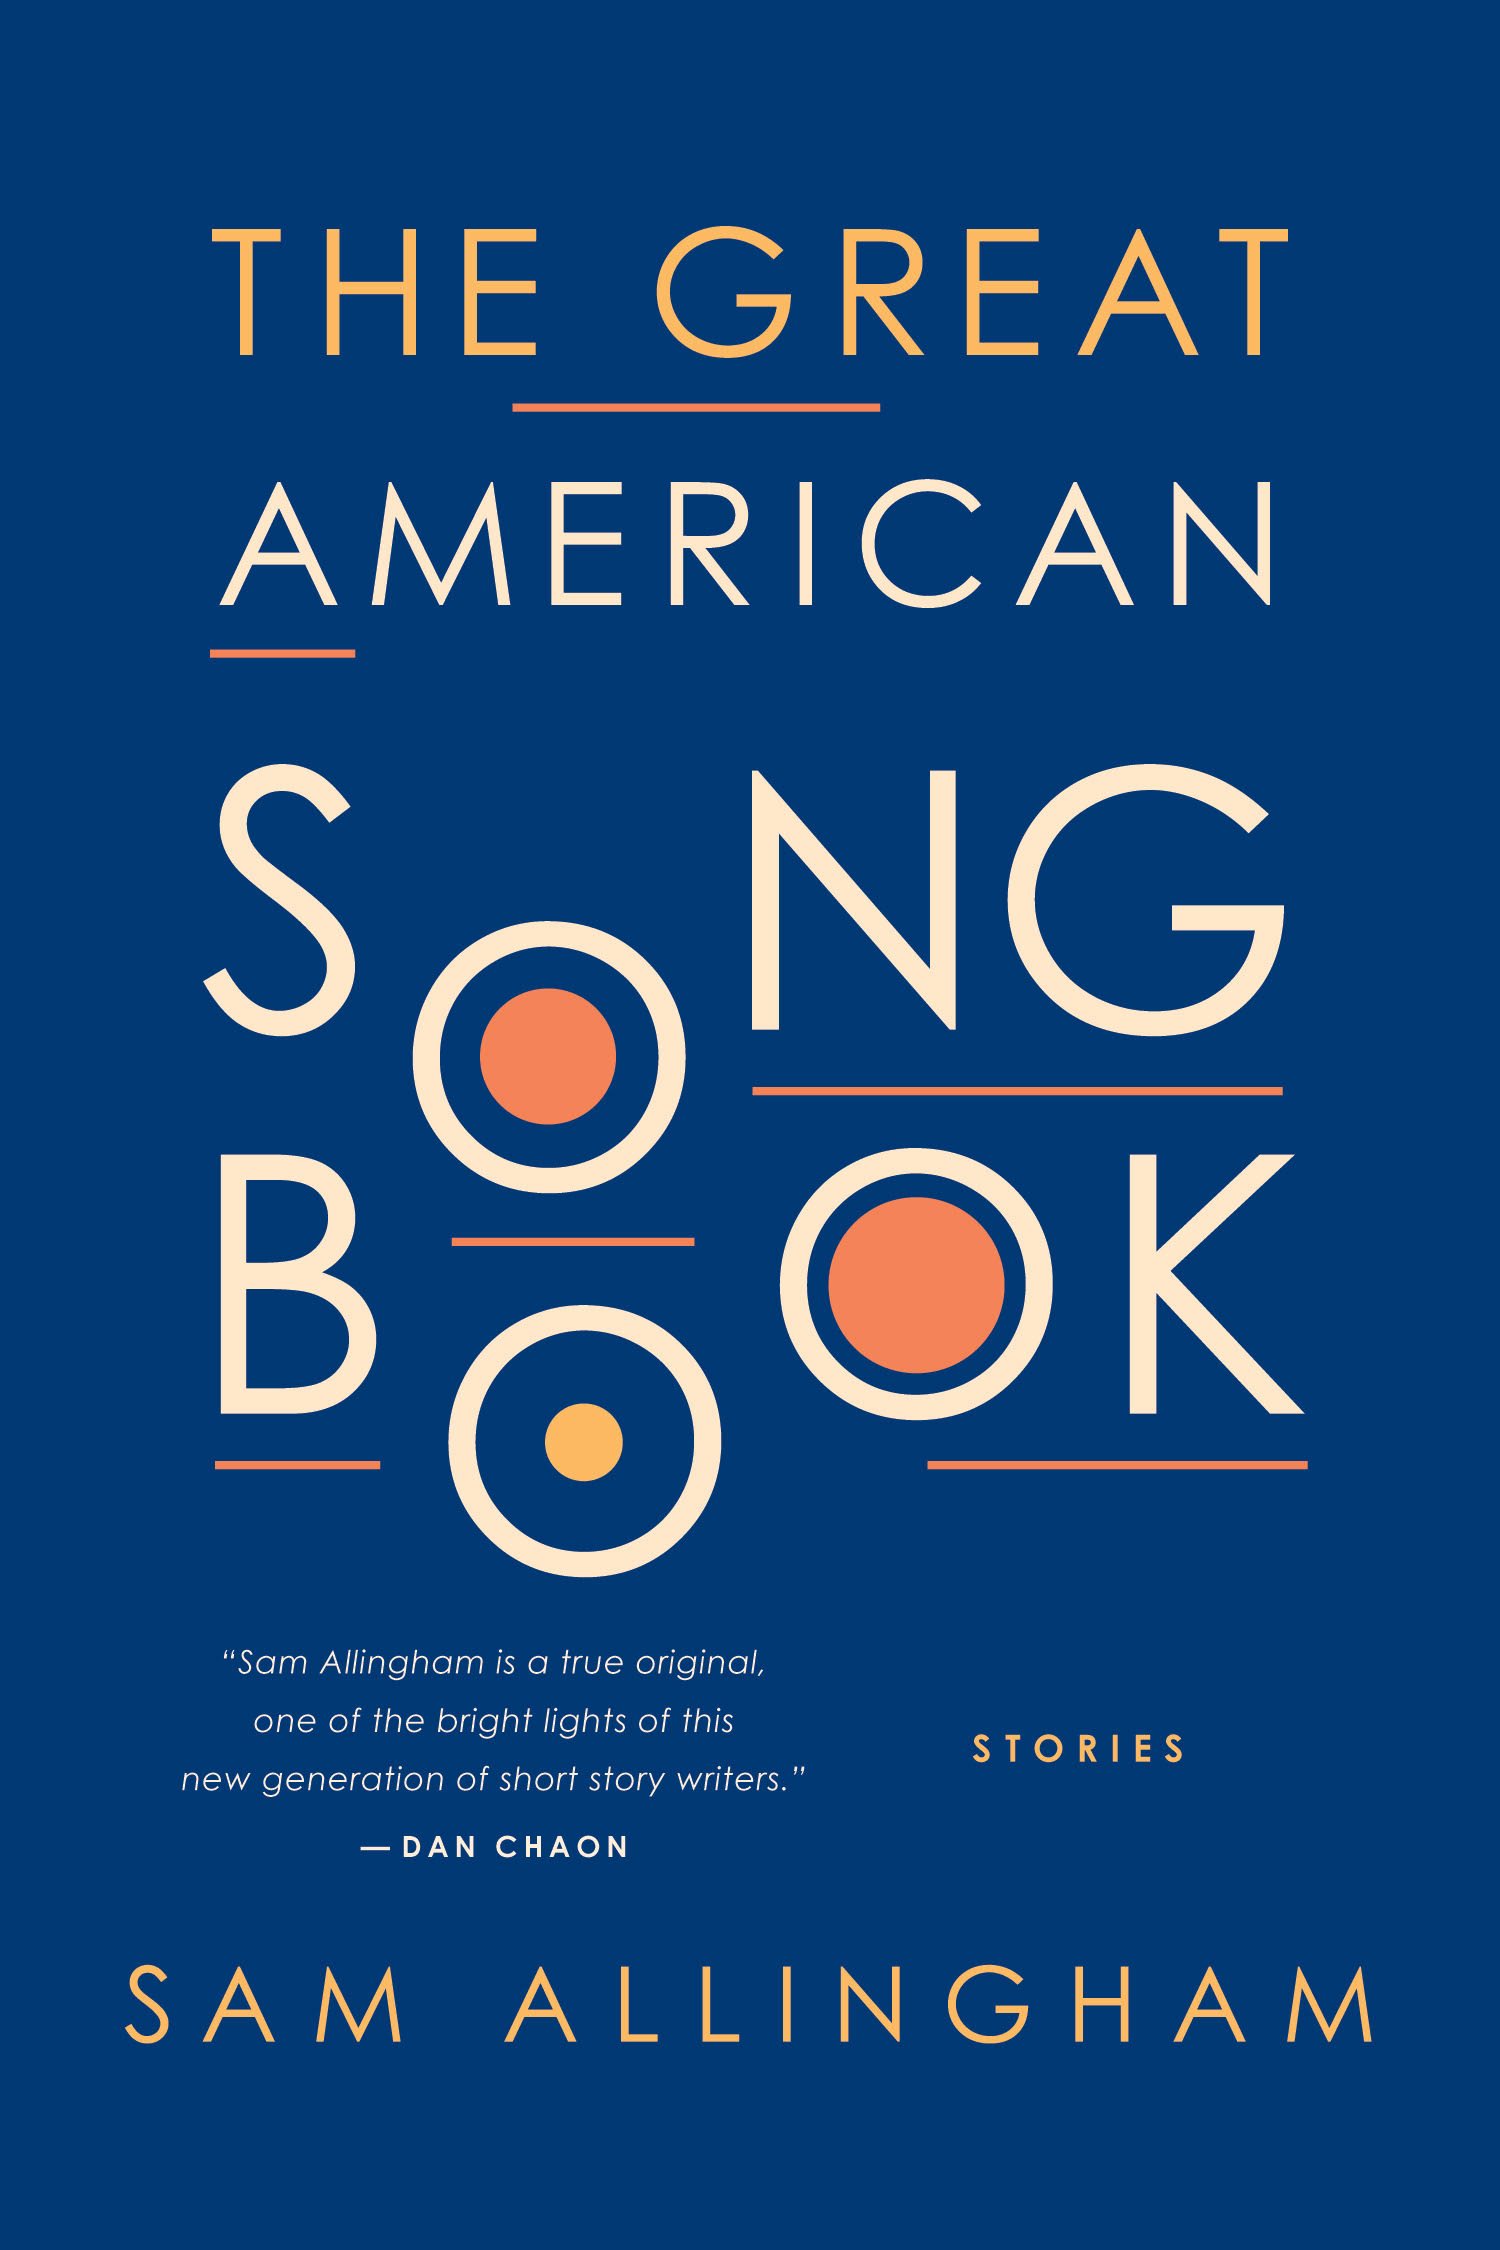 Allingham_THE GREAT AMERICAN SONGBOOK - use this one.jpg